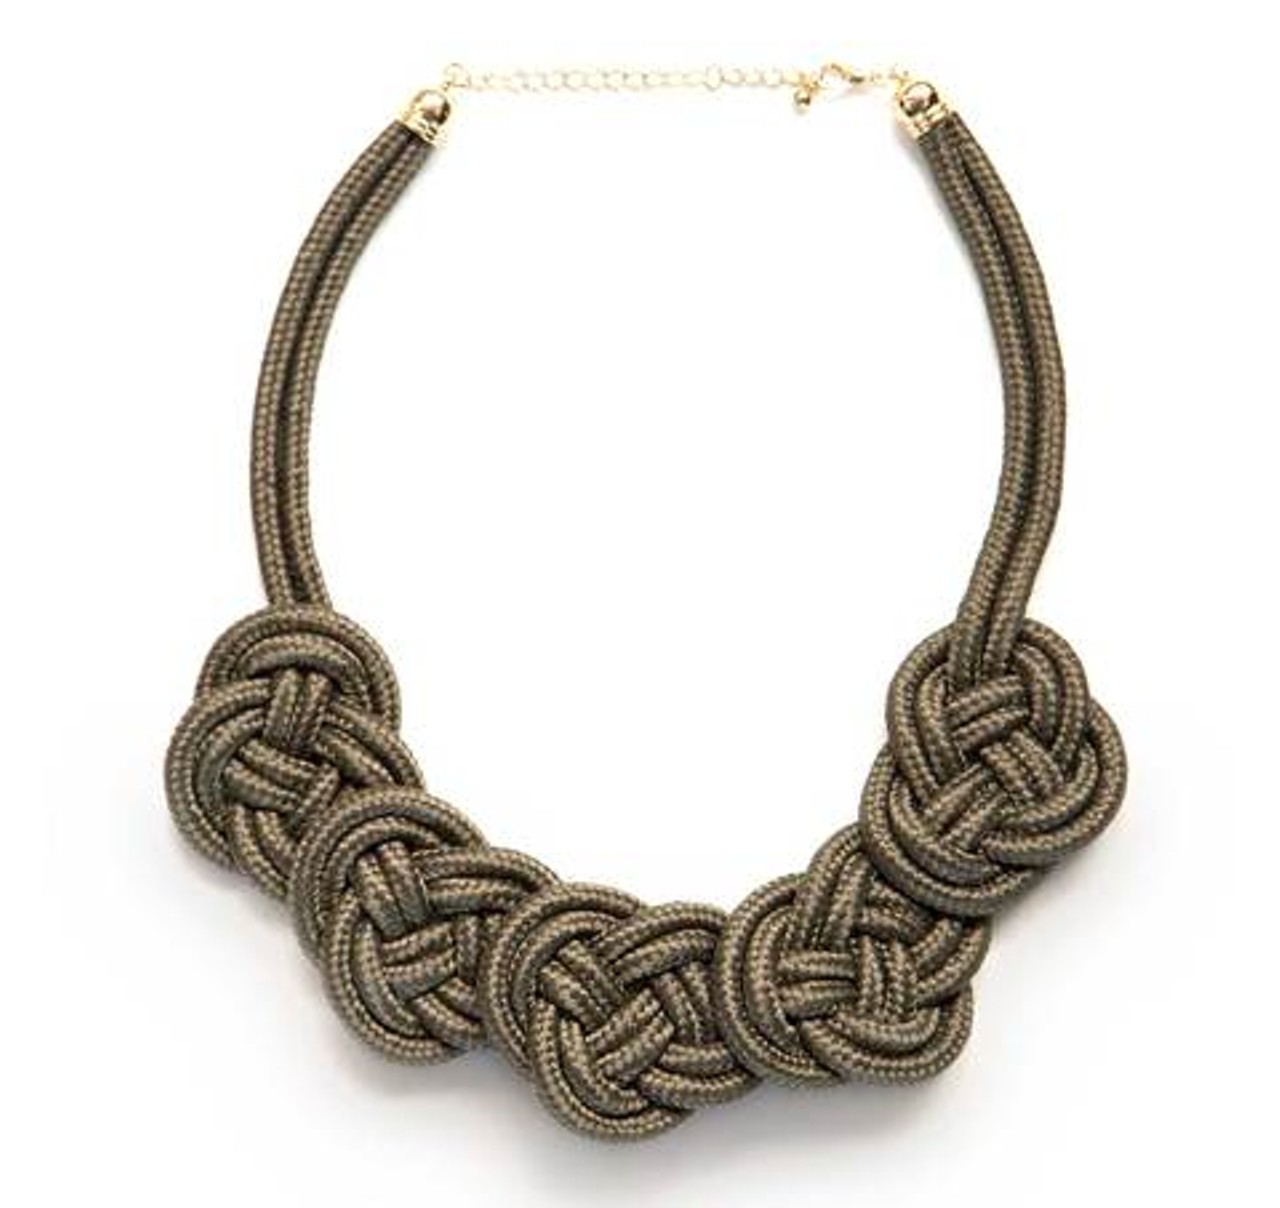 Five knot woven rope necklace, $36.